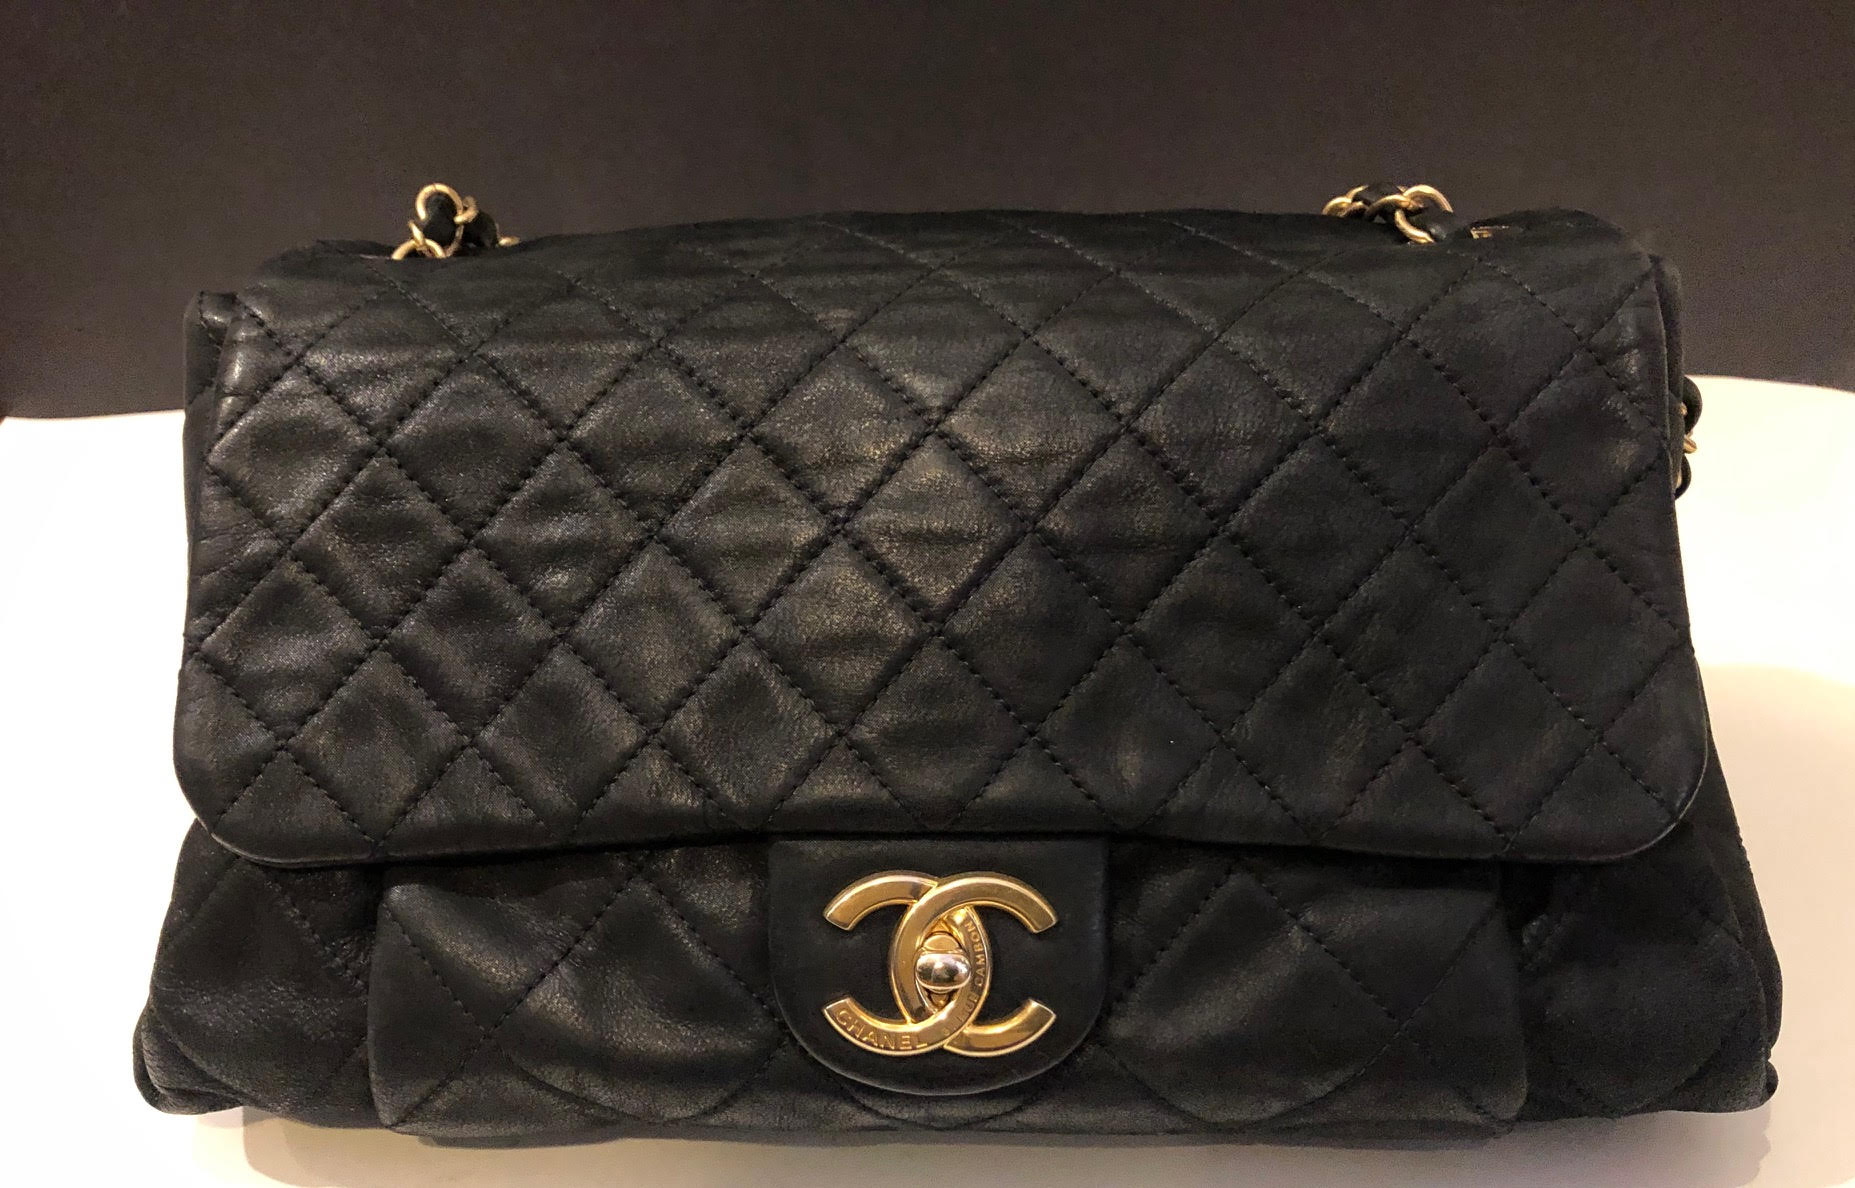 SCORED A BAG AT 31 RUE CAMBON – WHAT I GOT IN PARIS PT. I: CHANEL